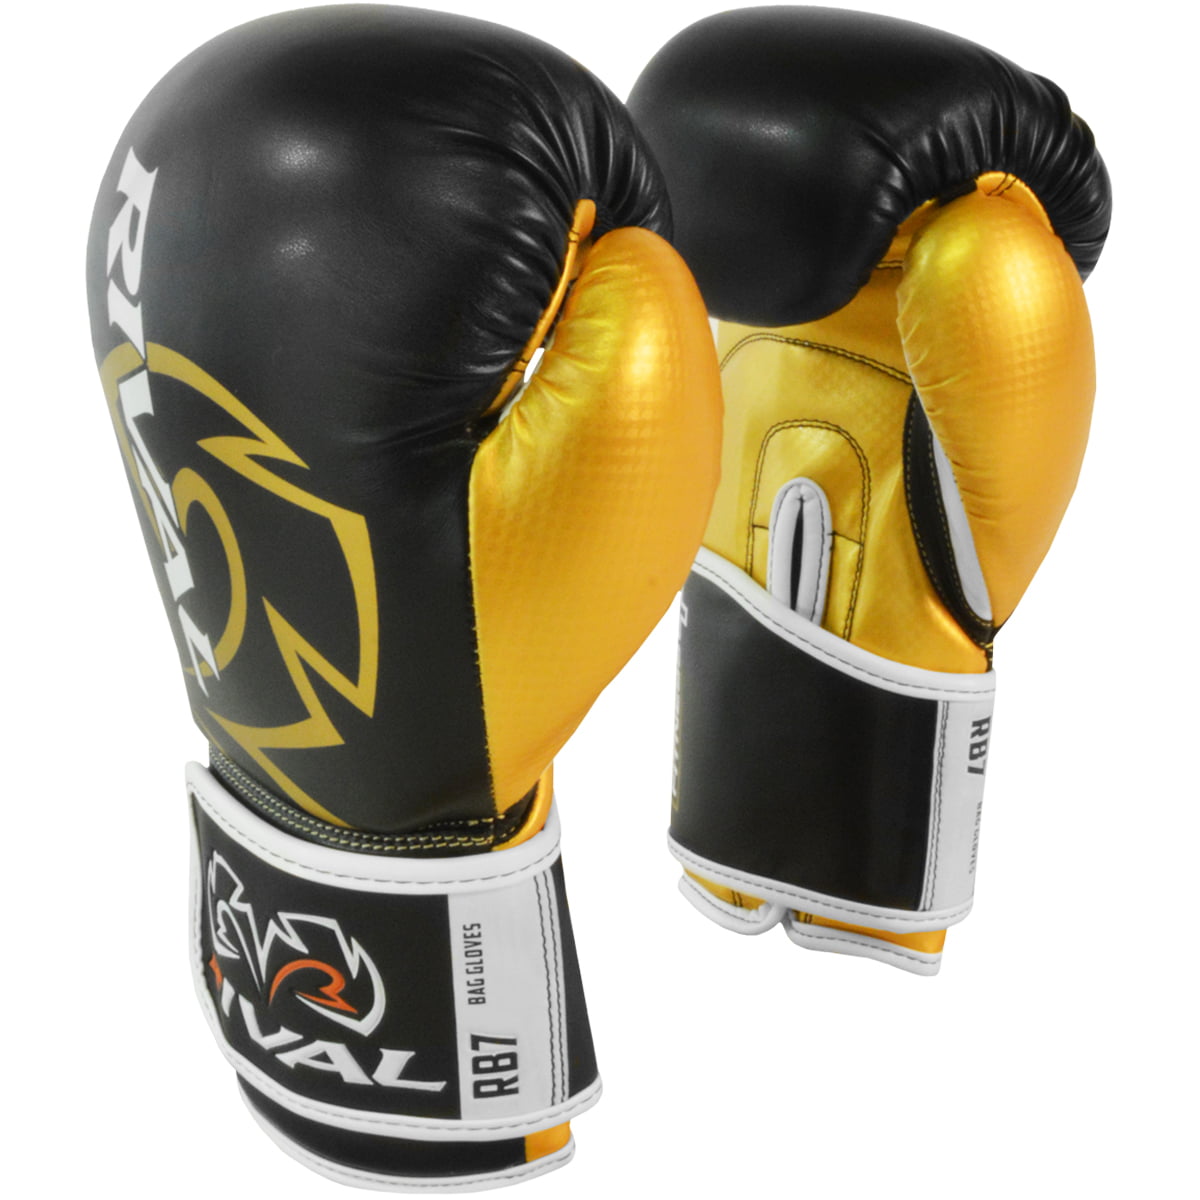 Rival Boxing Gloves RS100 Professional Sparring Training Workout Black Gold 